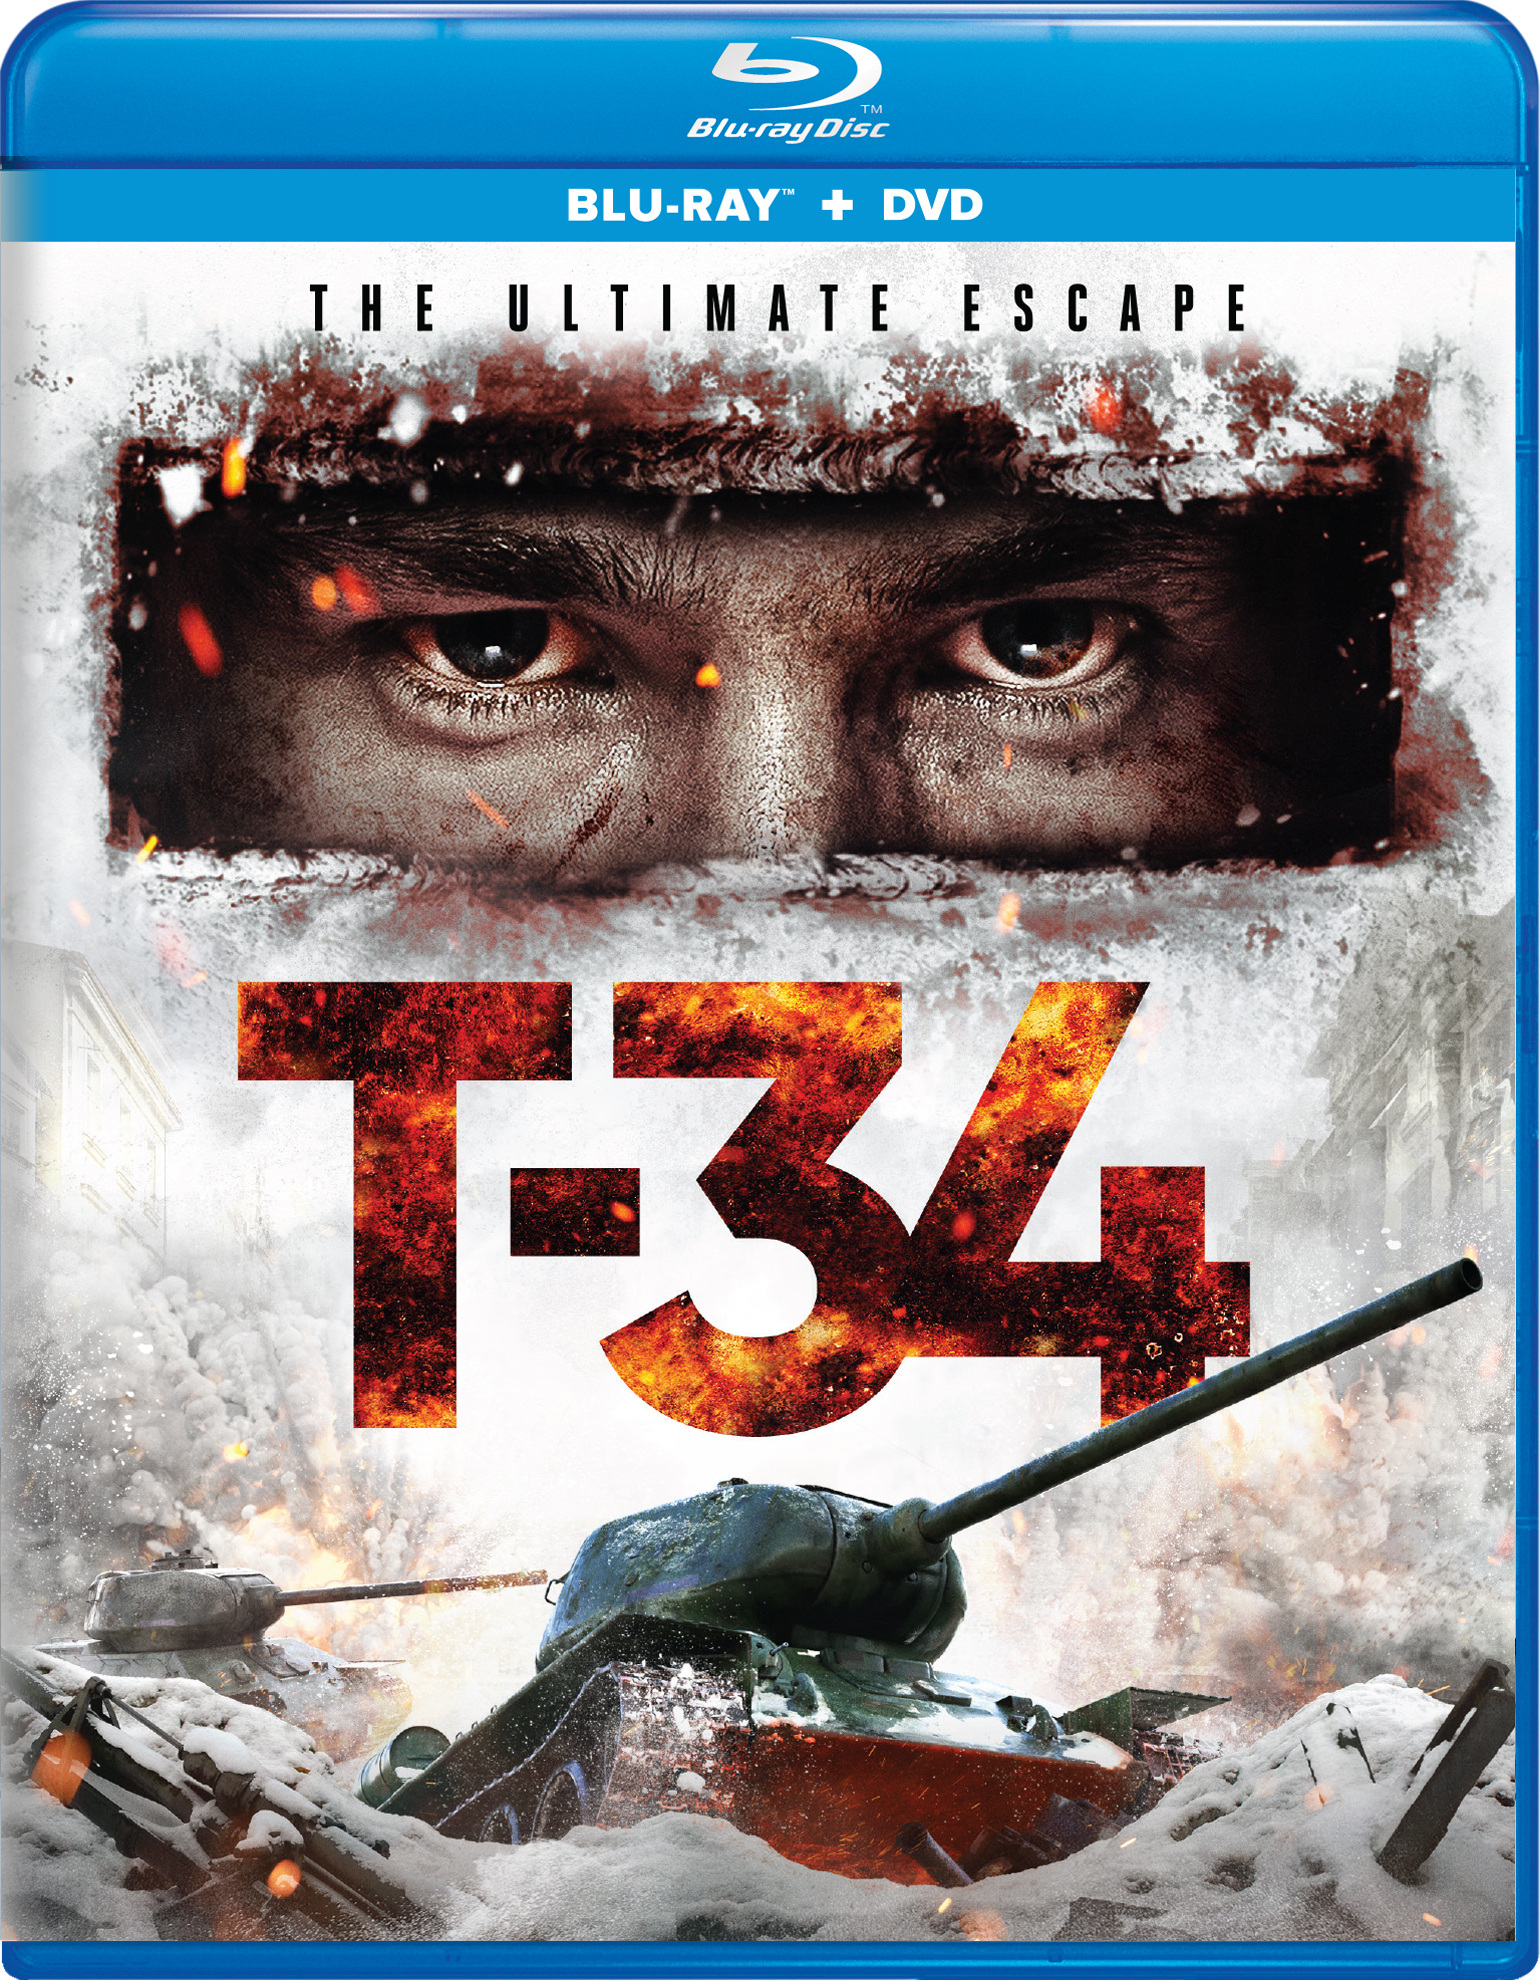 T-34 (with DVD) - Blu-ray [ 2018 ]  - Action Movies On Blu-ray - Movies On GRUV